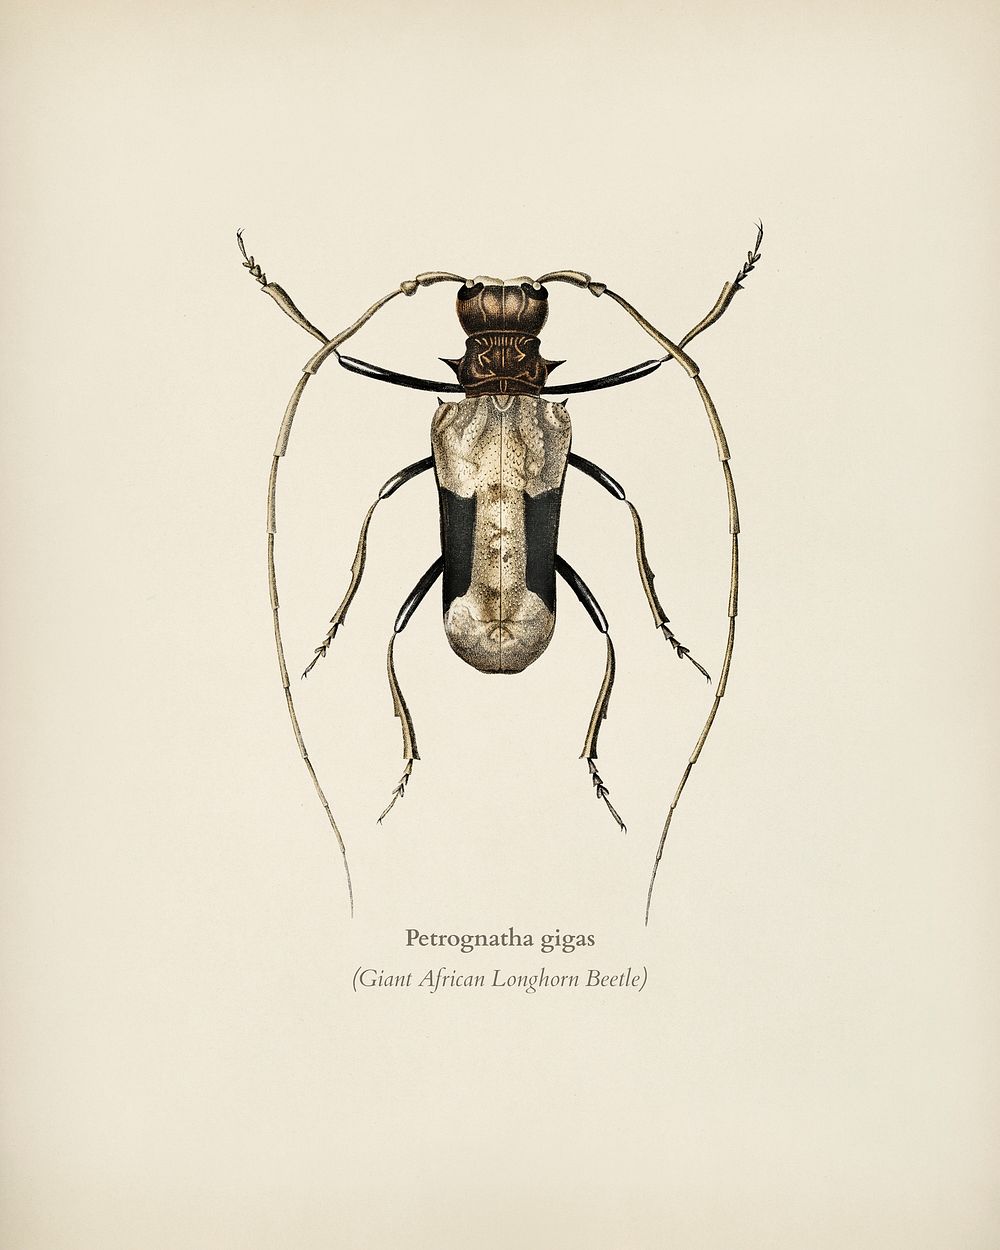 Giant African Longhorn Beetle (Petrognatha gigas) illustrated by Charles Dessalines D' Orbigny (1806-1876). Digitally…